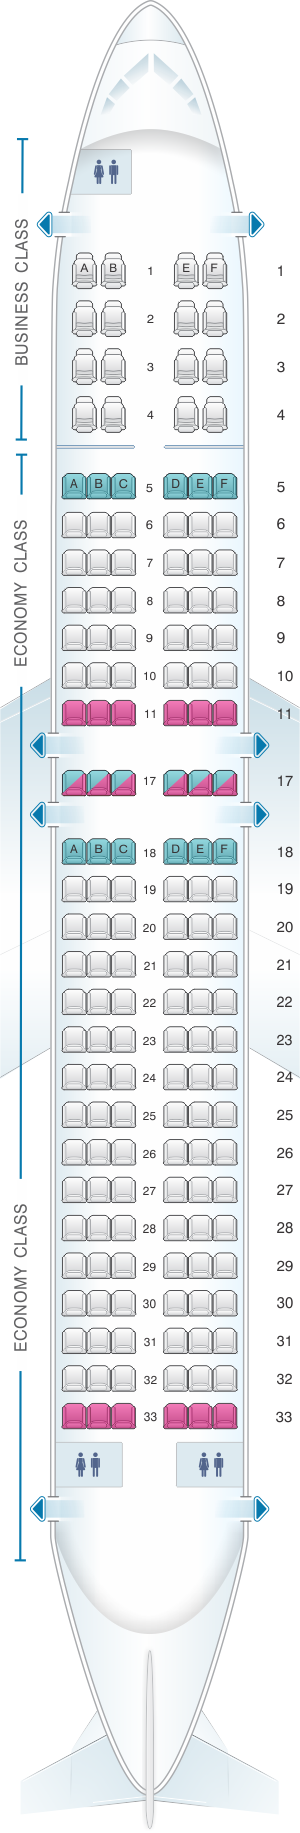 Seat map for Copa Airlines Boeing B737 800A